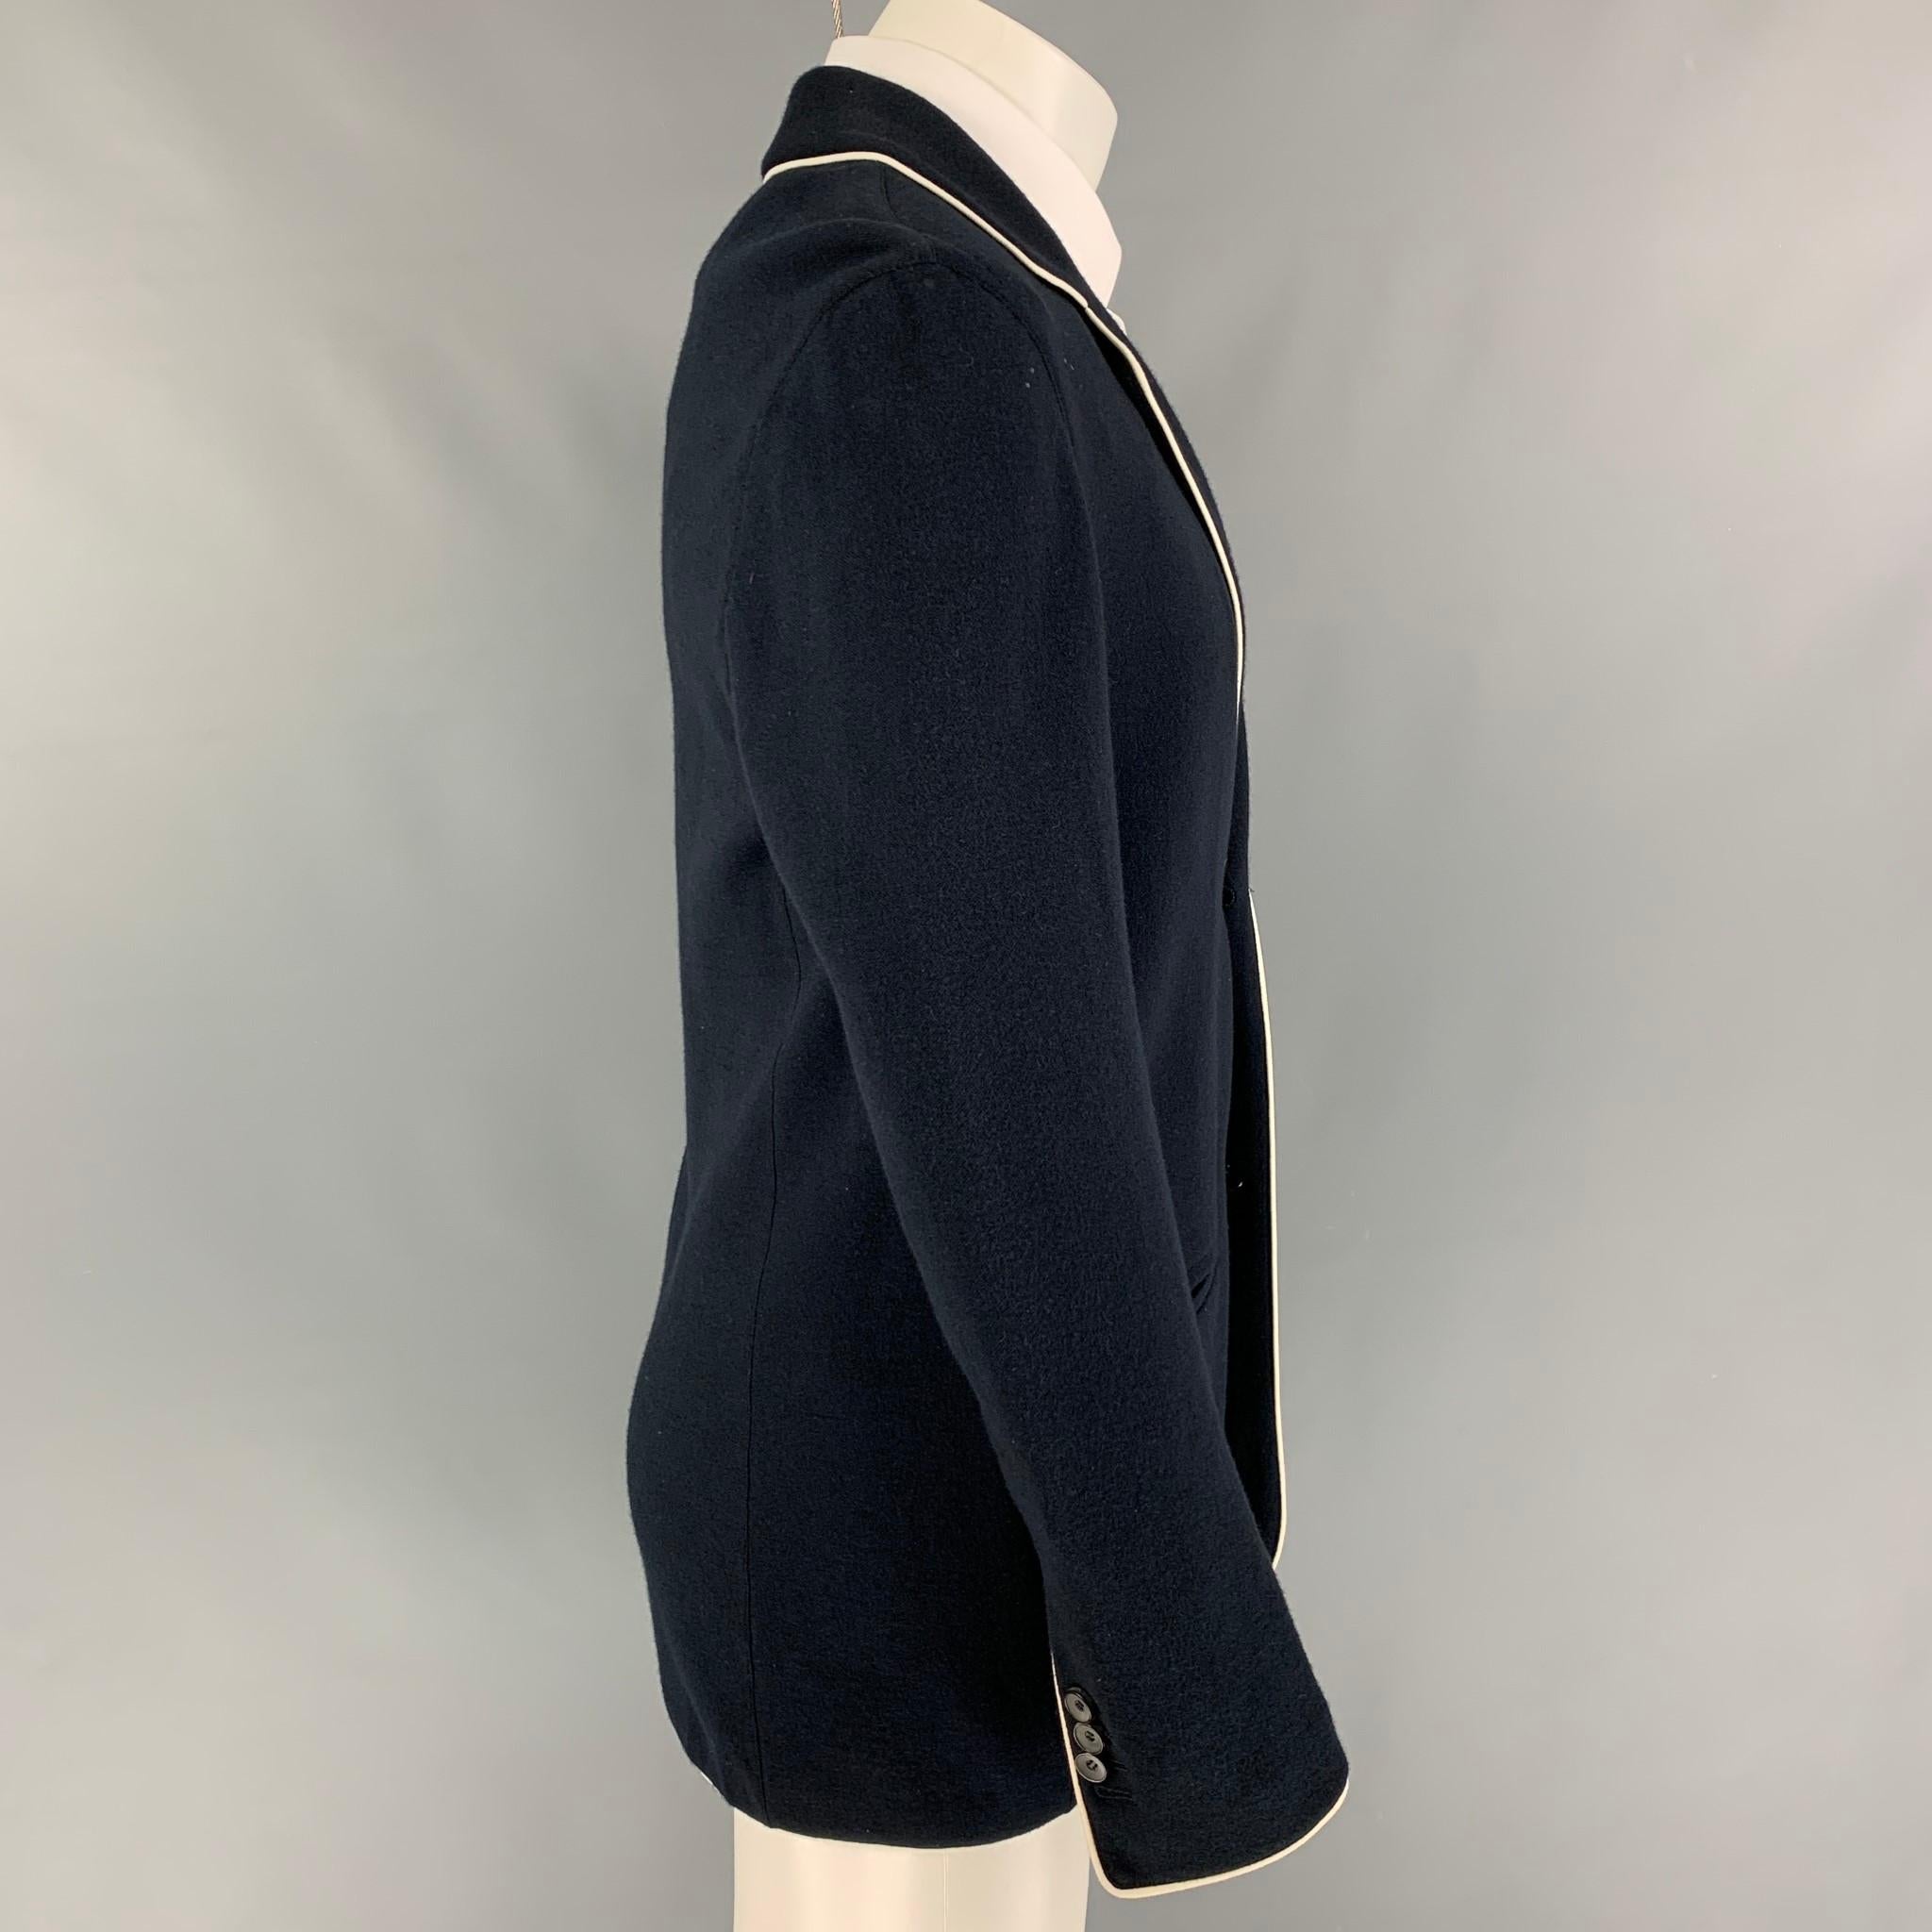 GIORGIO ARMANI sport coat comes in a navy cotton blend with white piping featuring a notch lapel, slit pockets, and a double button closure. Made in Italy. 

Very Good Pre-Owned Condition. Light marks at front.
Marked: 50

Measurements:

Shoulder: